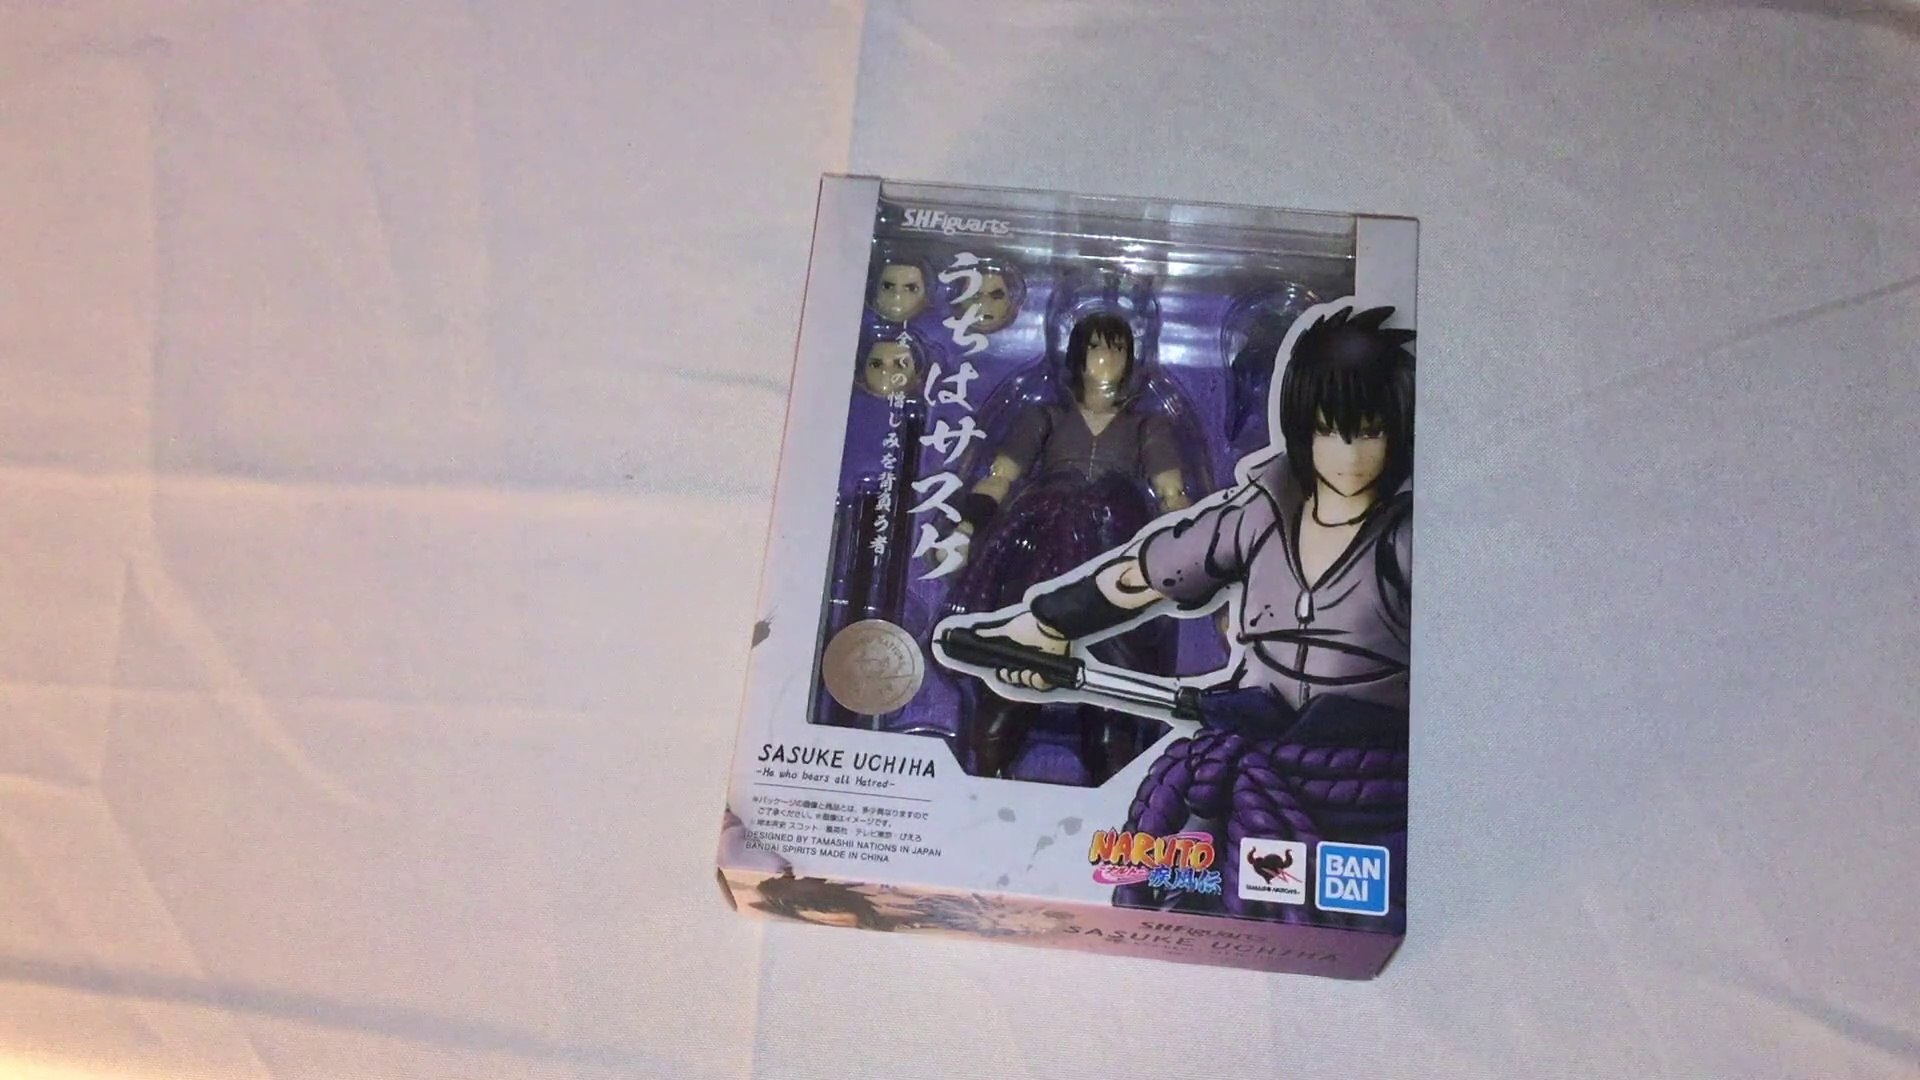 S.H. Figuarts Naruto: Shippuden Sasuke Uchiha - He Who Bares All Hatred  Unboxing & Review - video Dailymotion